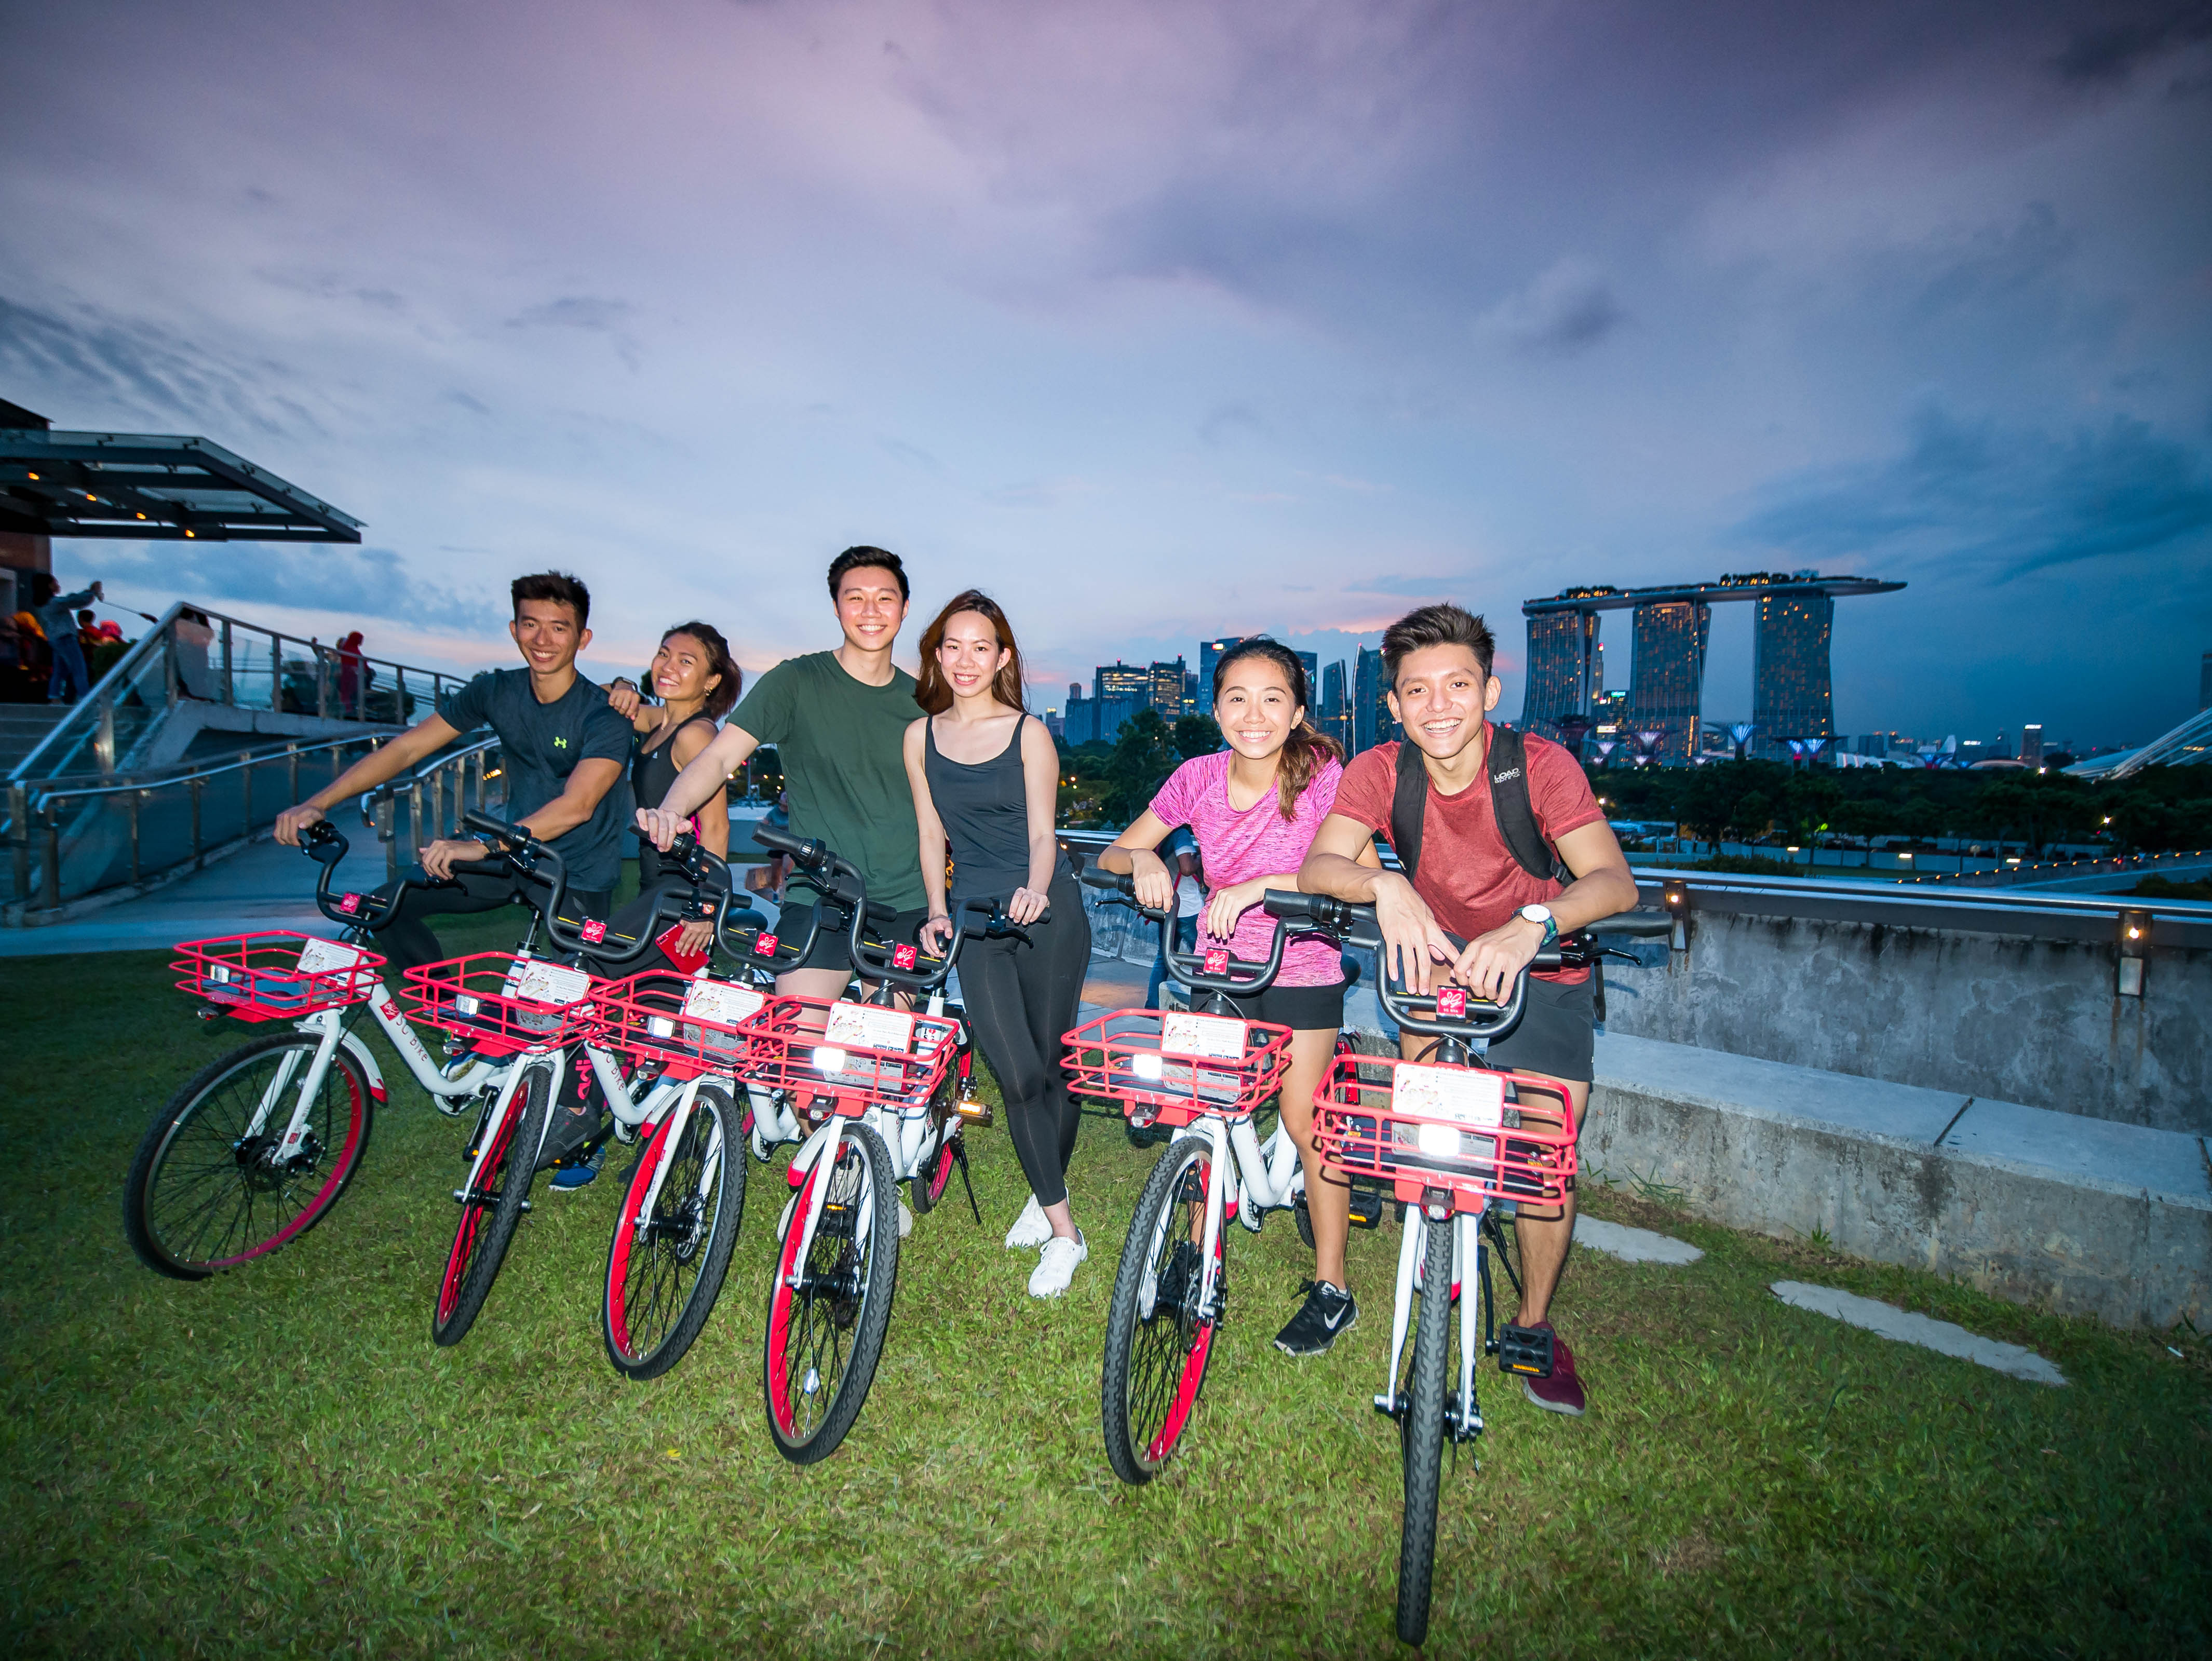 Bike-sharing’s turbulent times in Singapore: Q&A with SG Bike’s co-founders